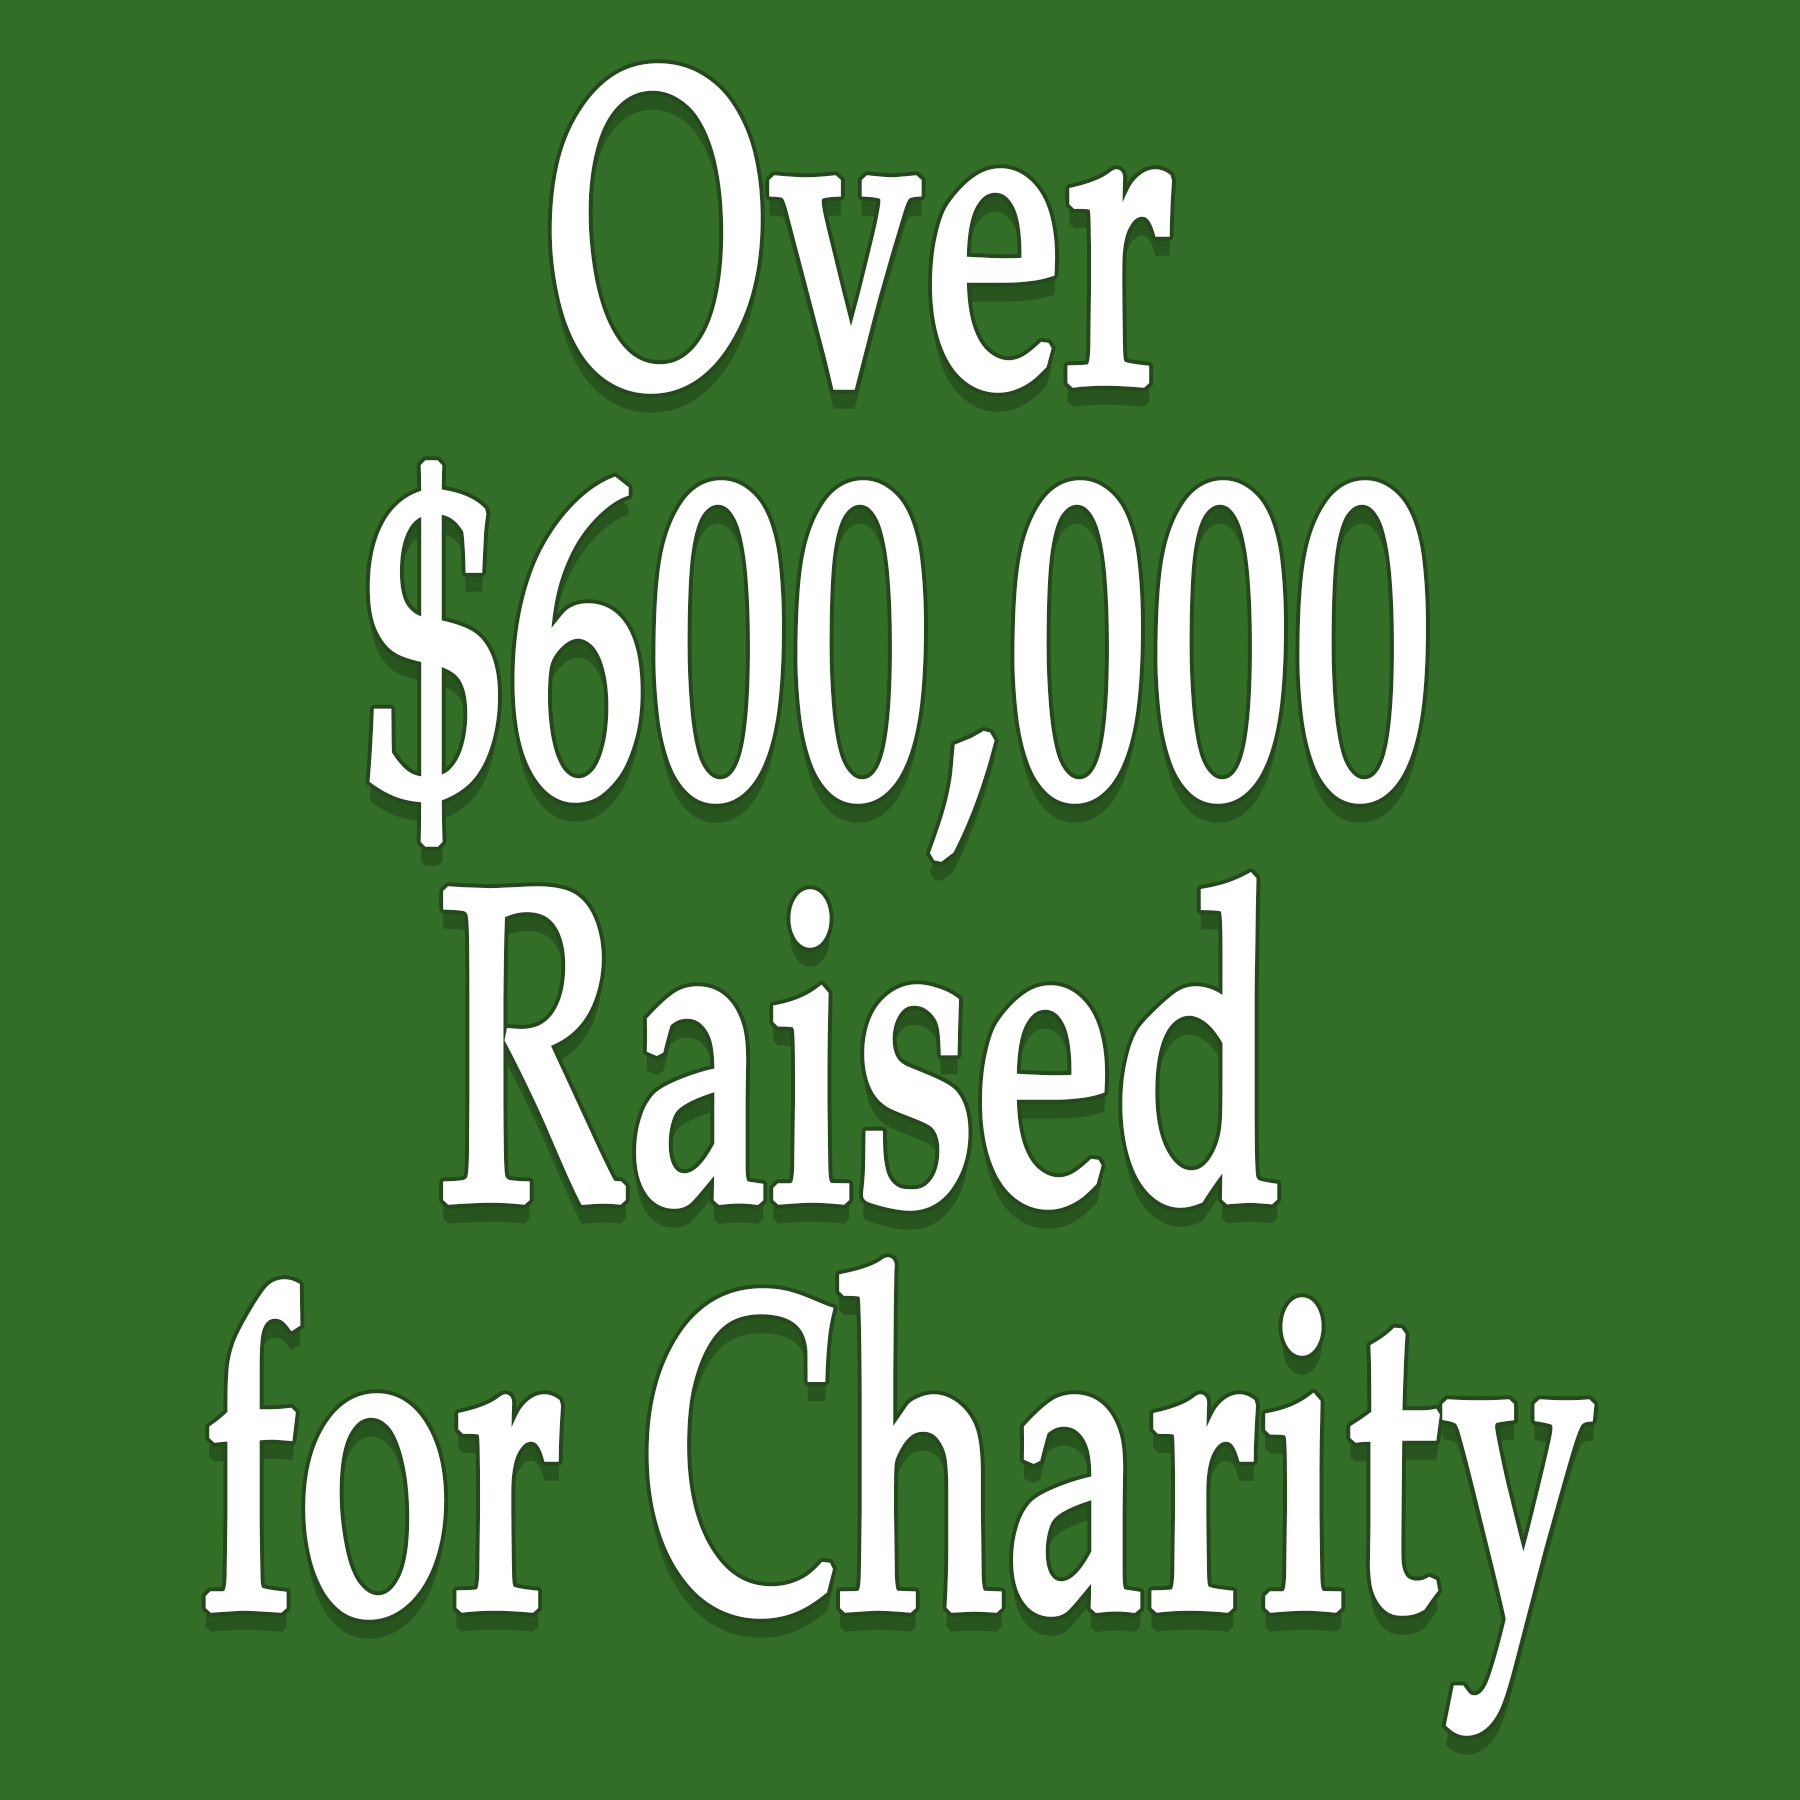 Over $600,000 Raised For Charity